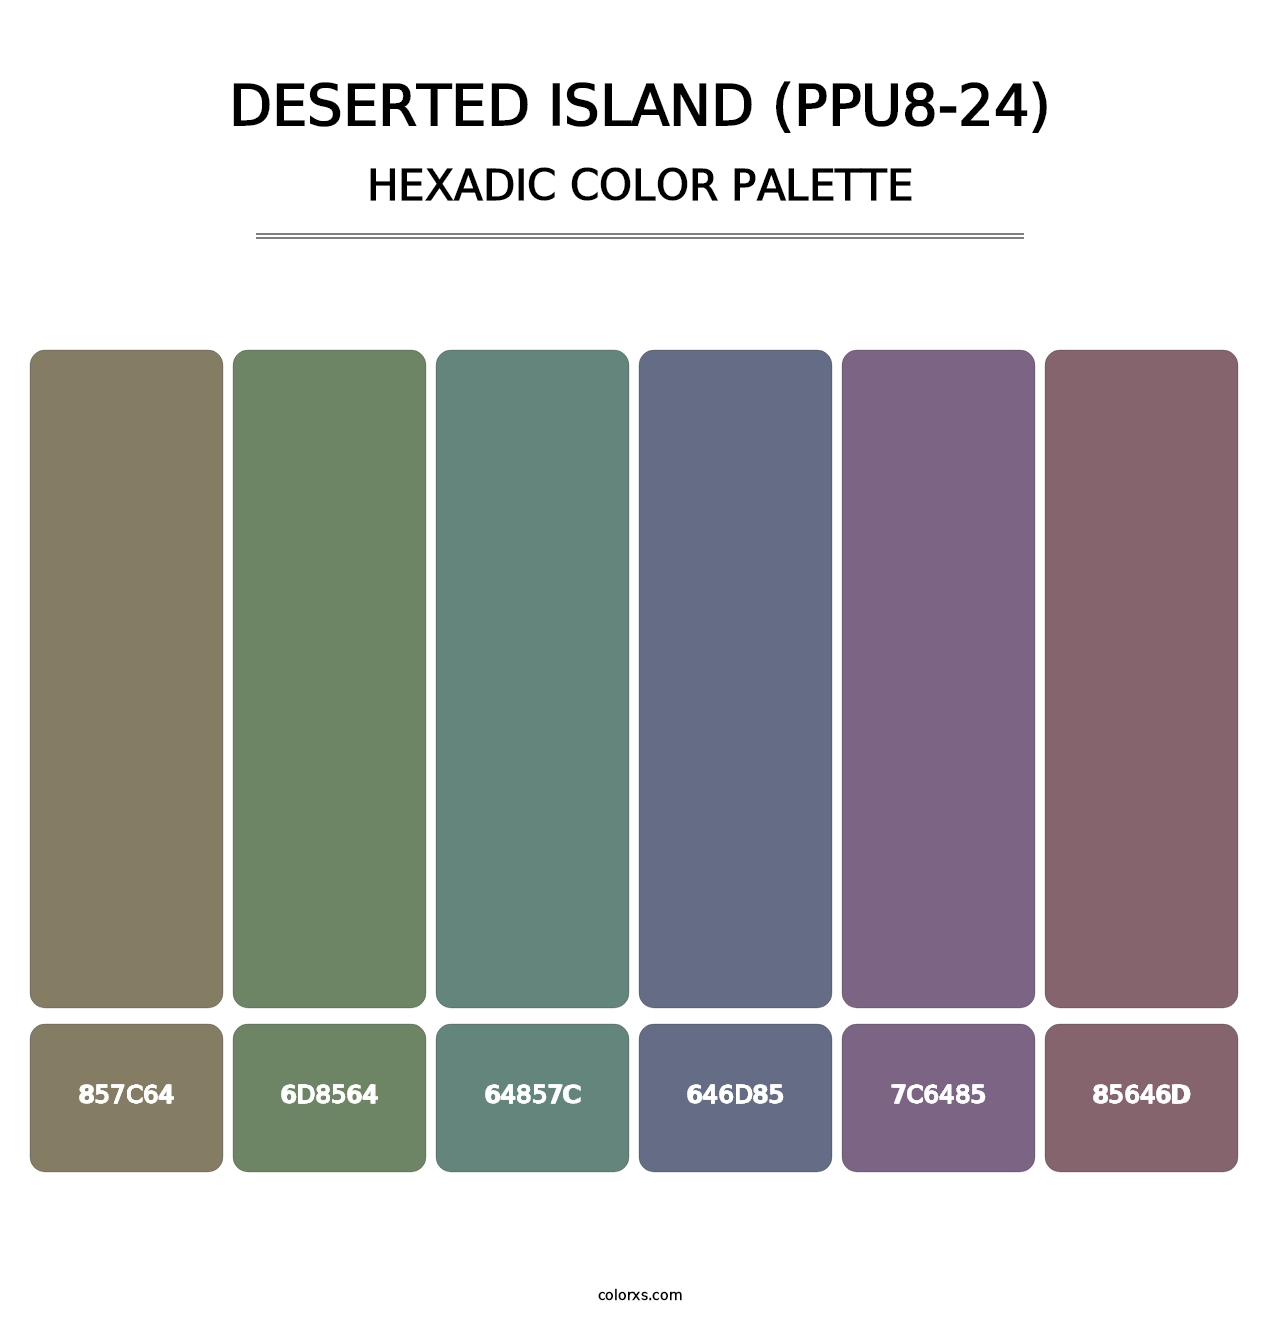 Deserted Island (PPU8-24) - Hexadic Color Palette